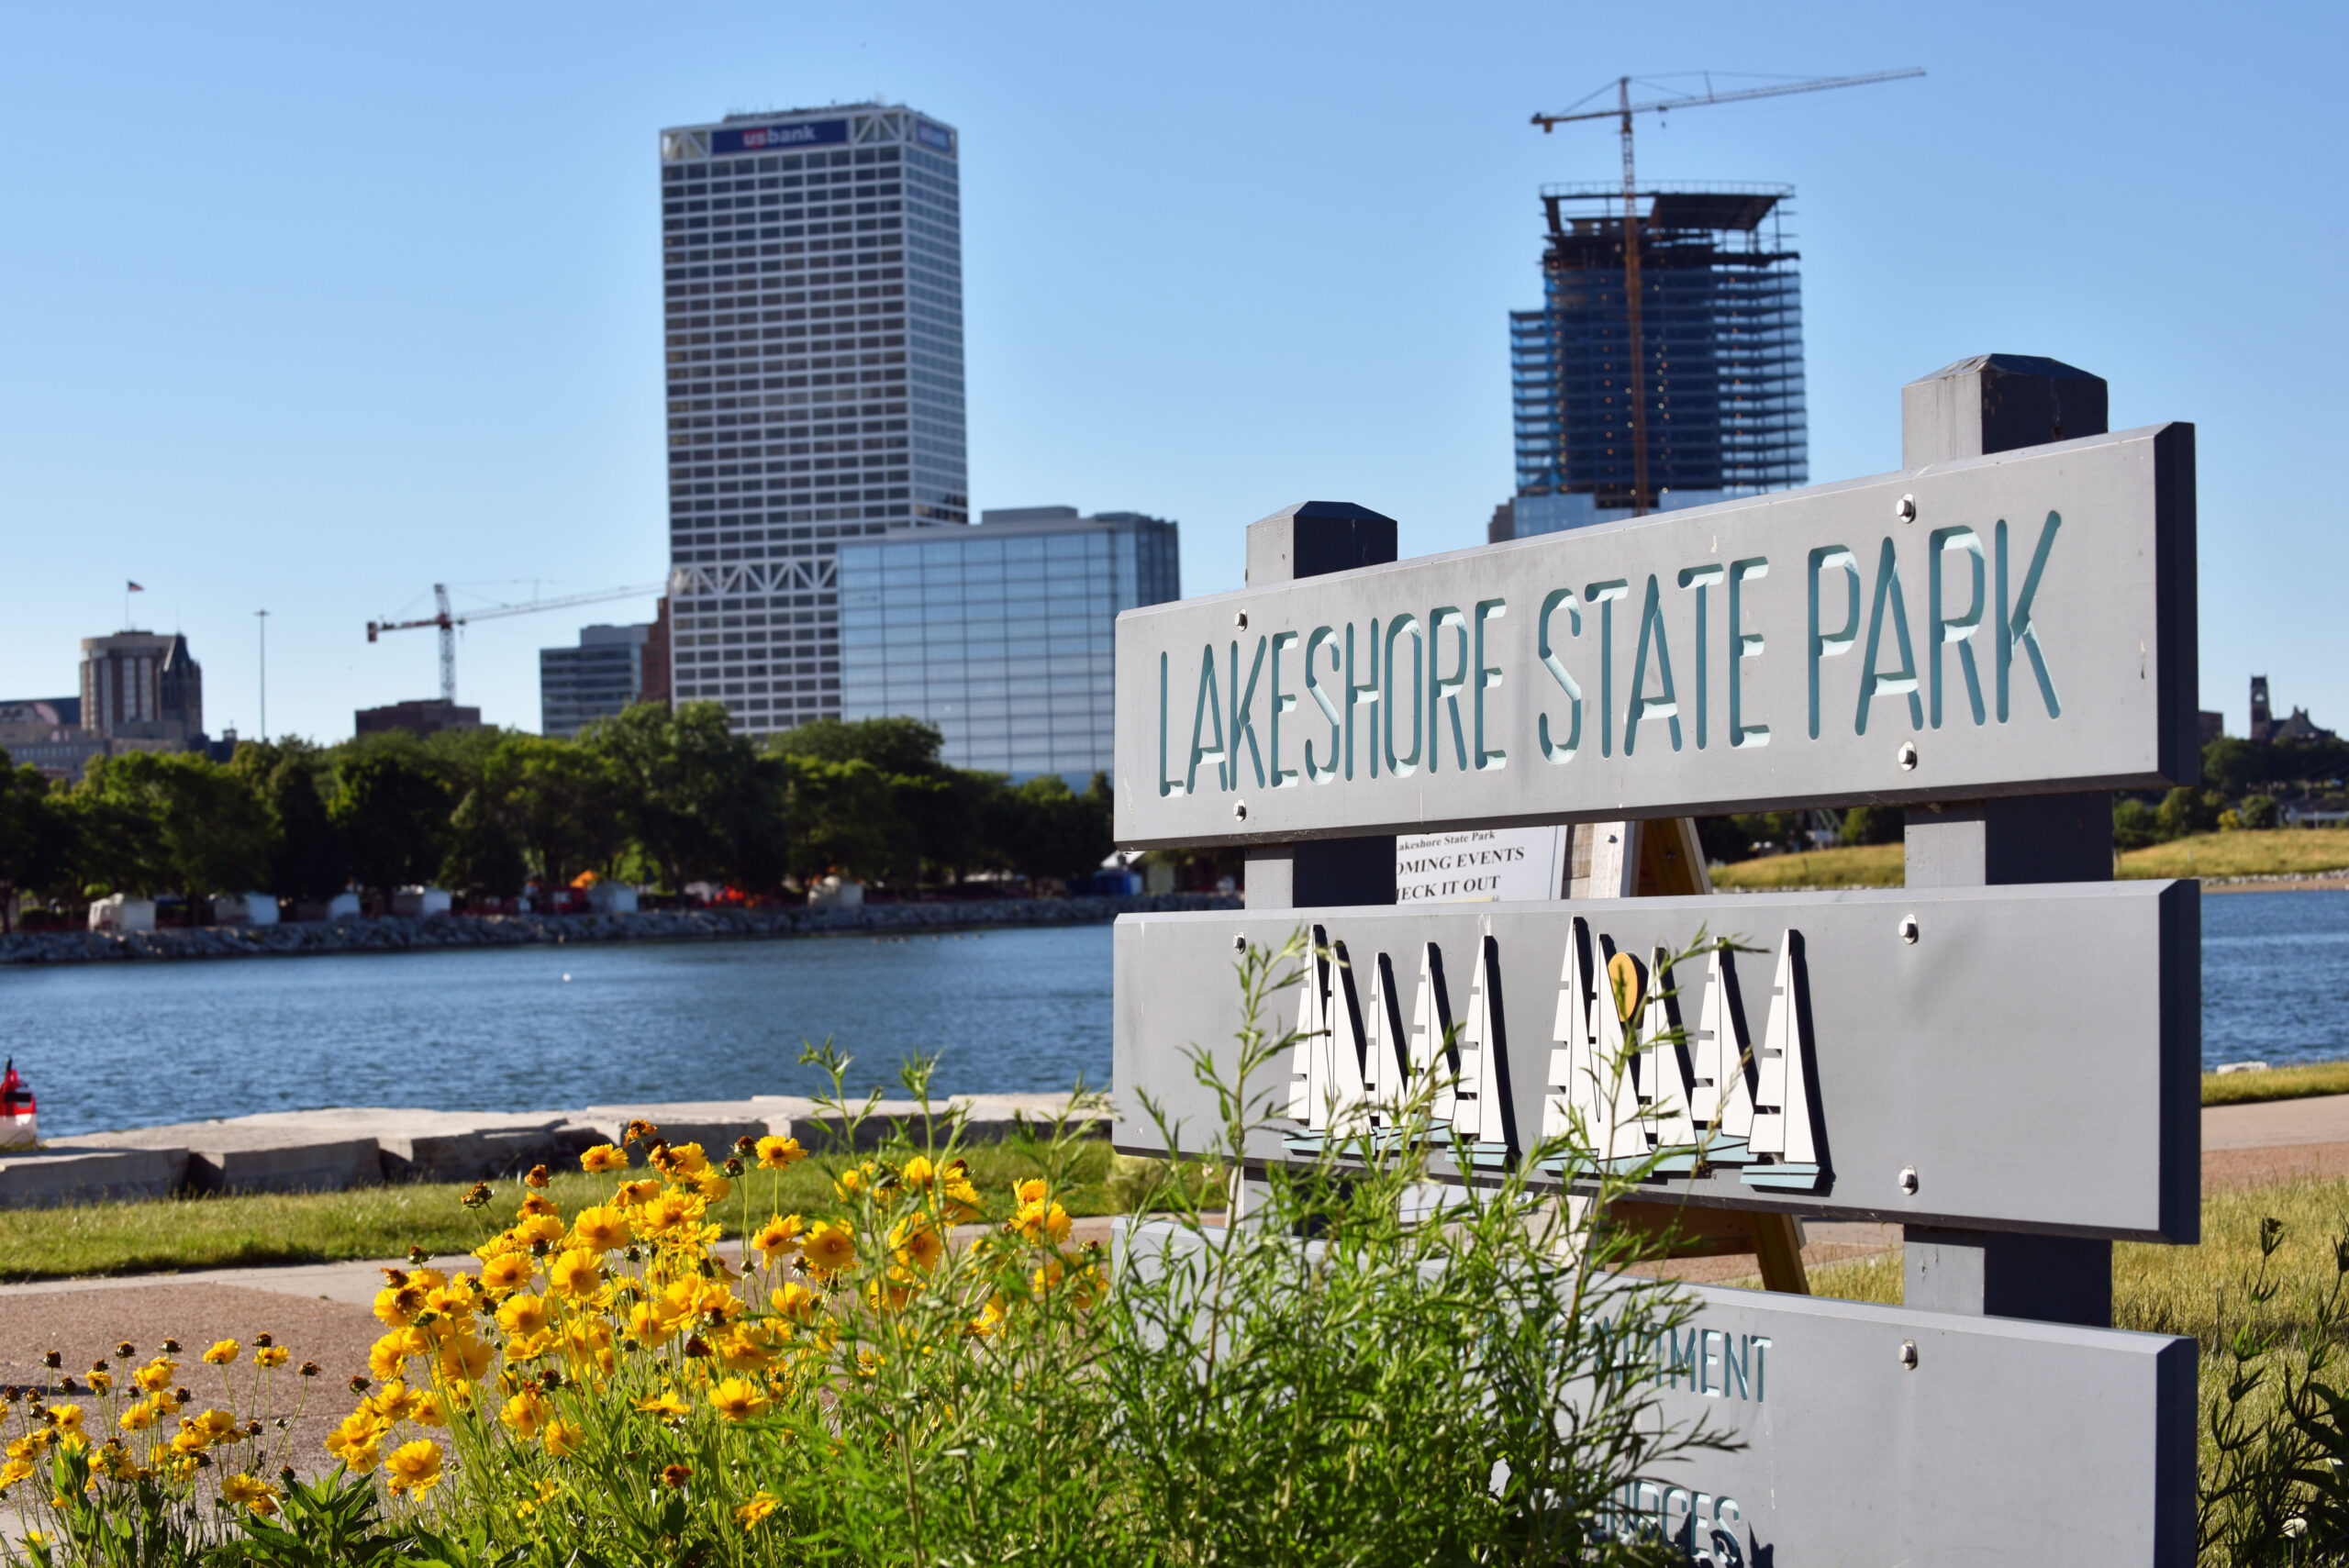 Lakeshore State Park sign at Southern entrance